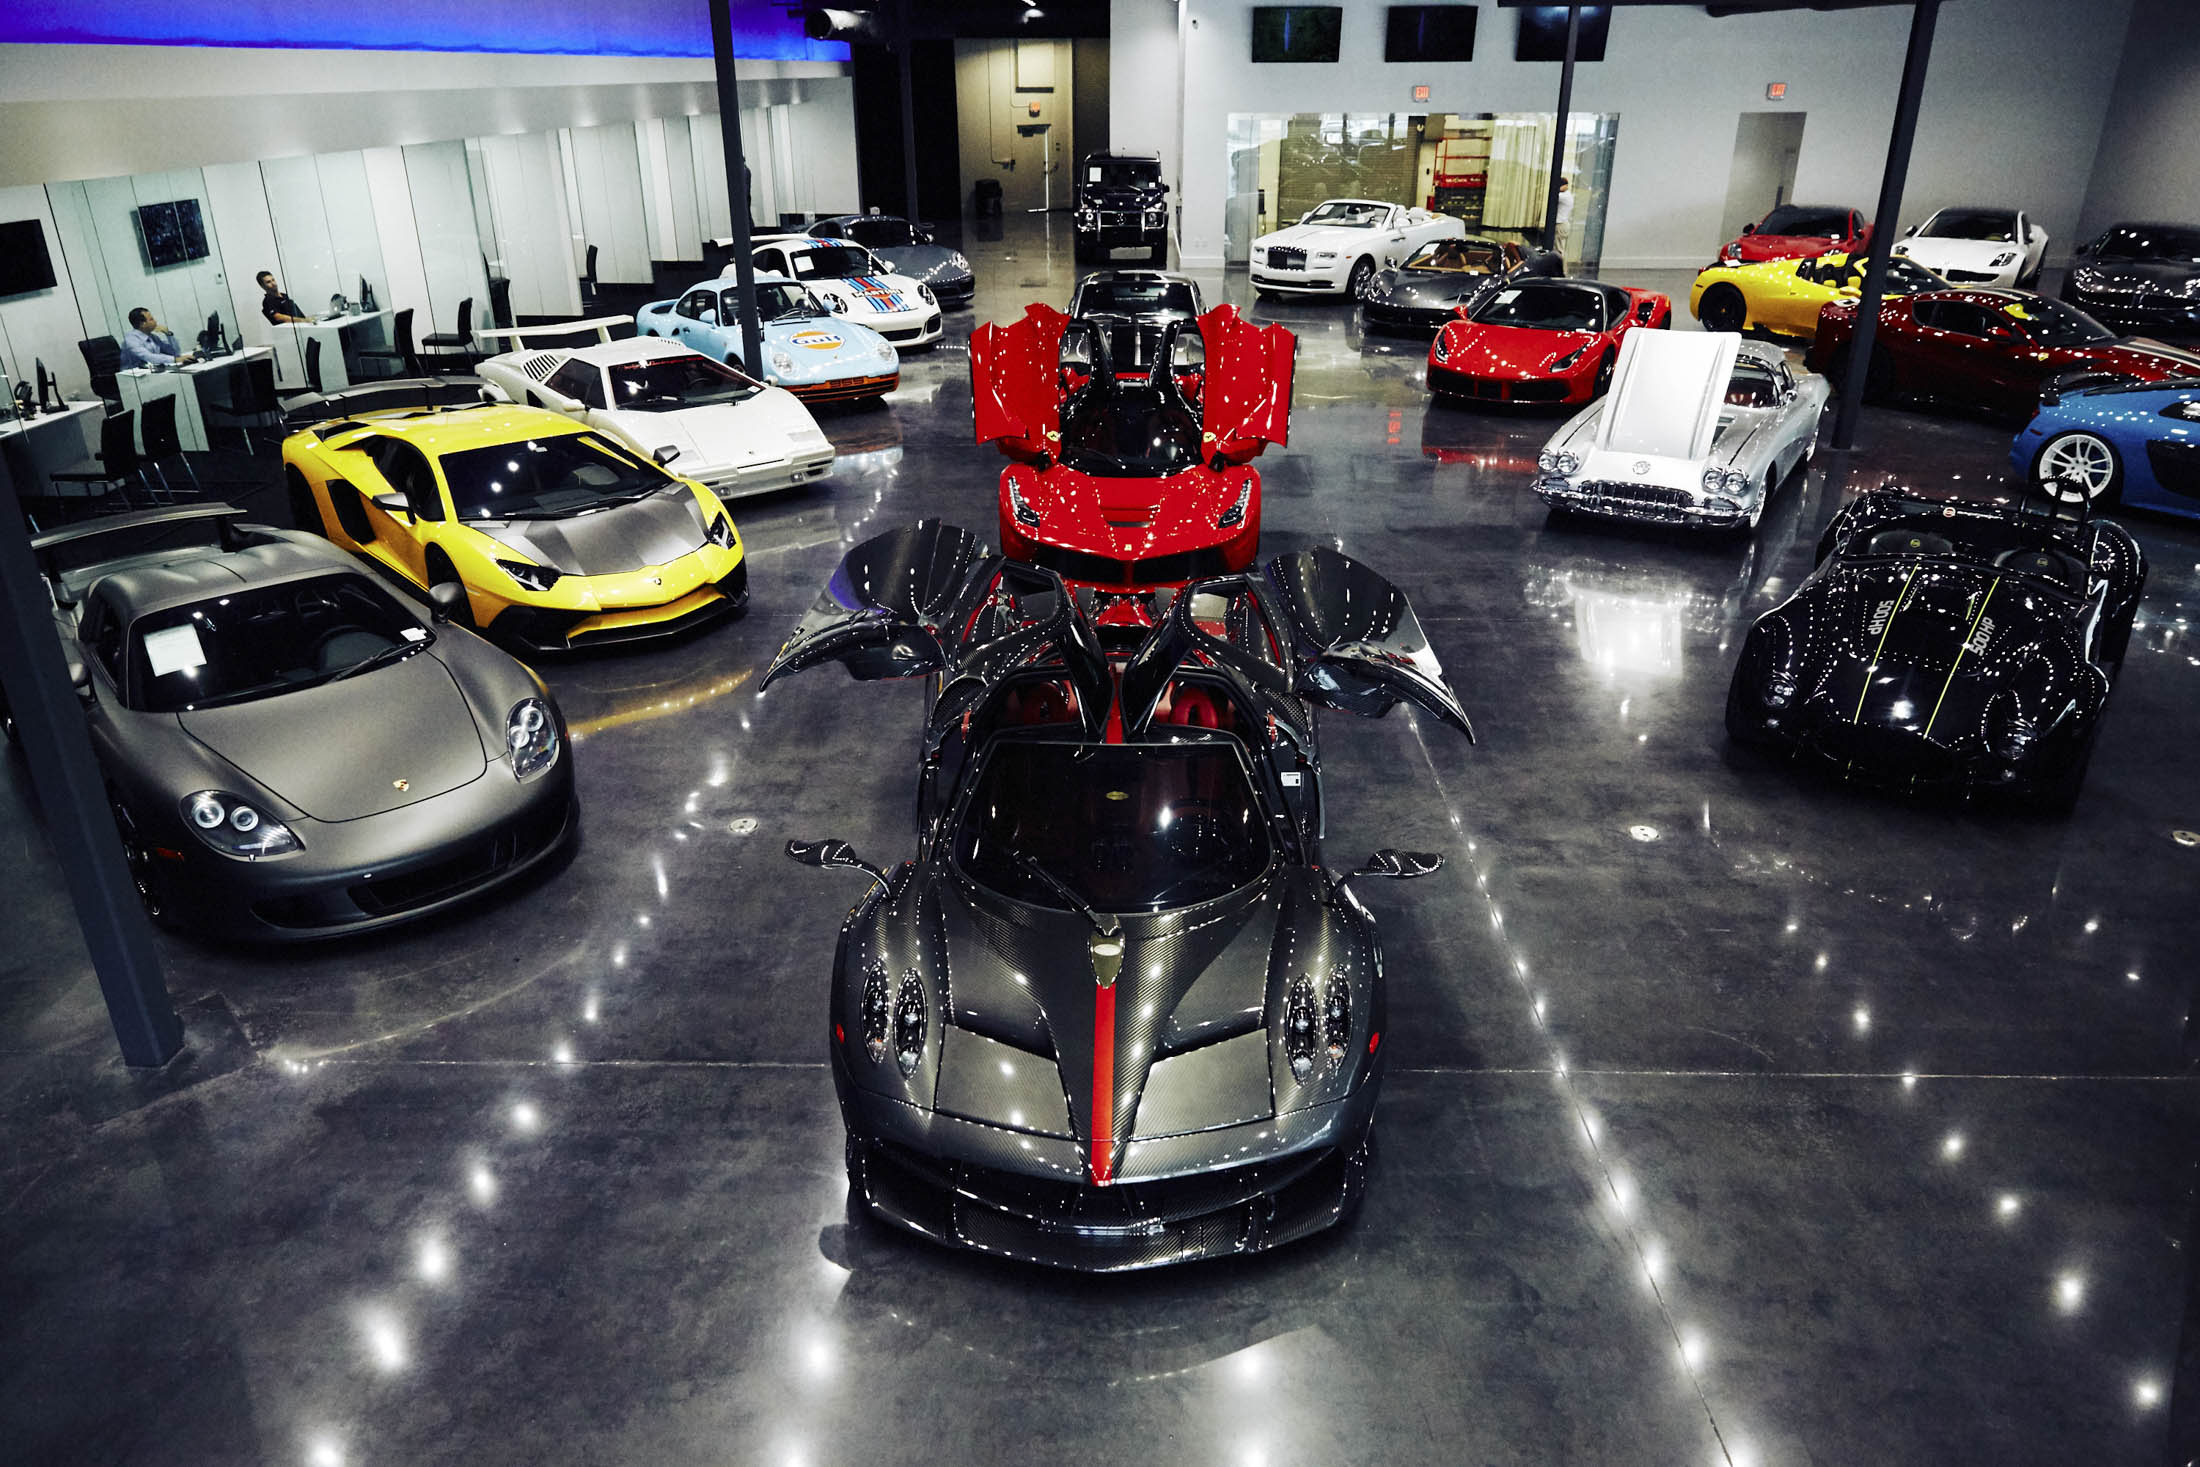 Romancing the Supercar Buyer: How Luxe Car Dealers Clinch a Sale